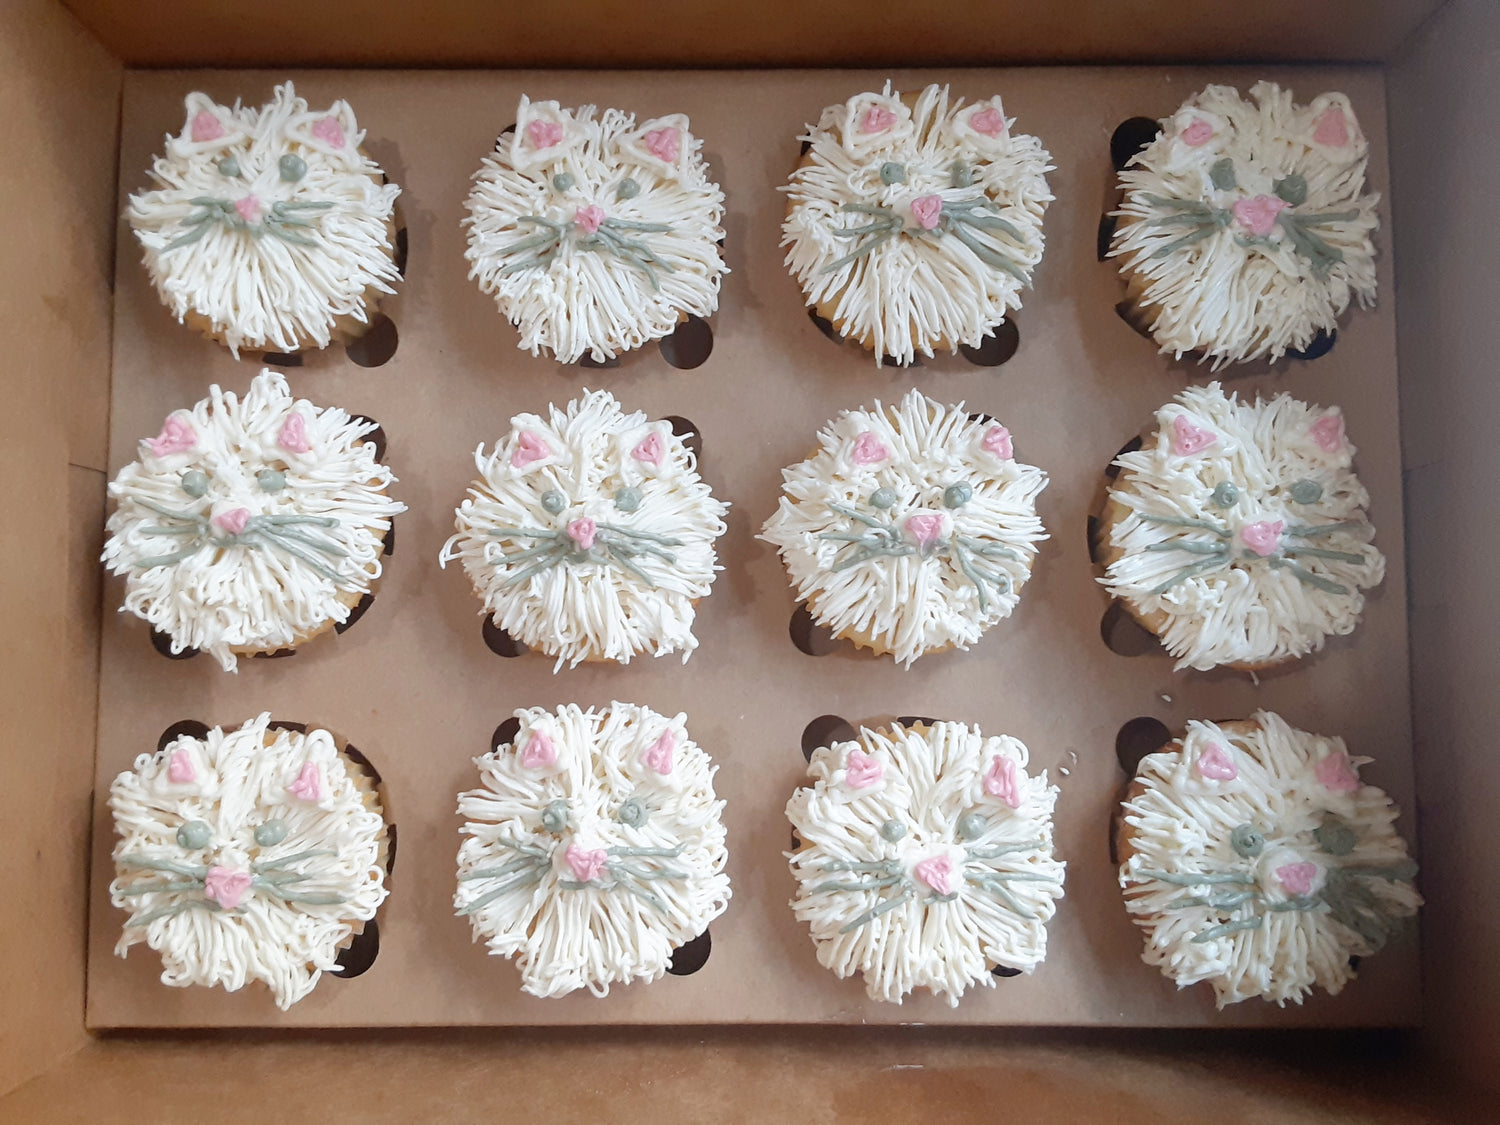 Cupcakes Delivery, Order Cupcakes Online by Best Cake Shop - Flower Aura